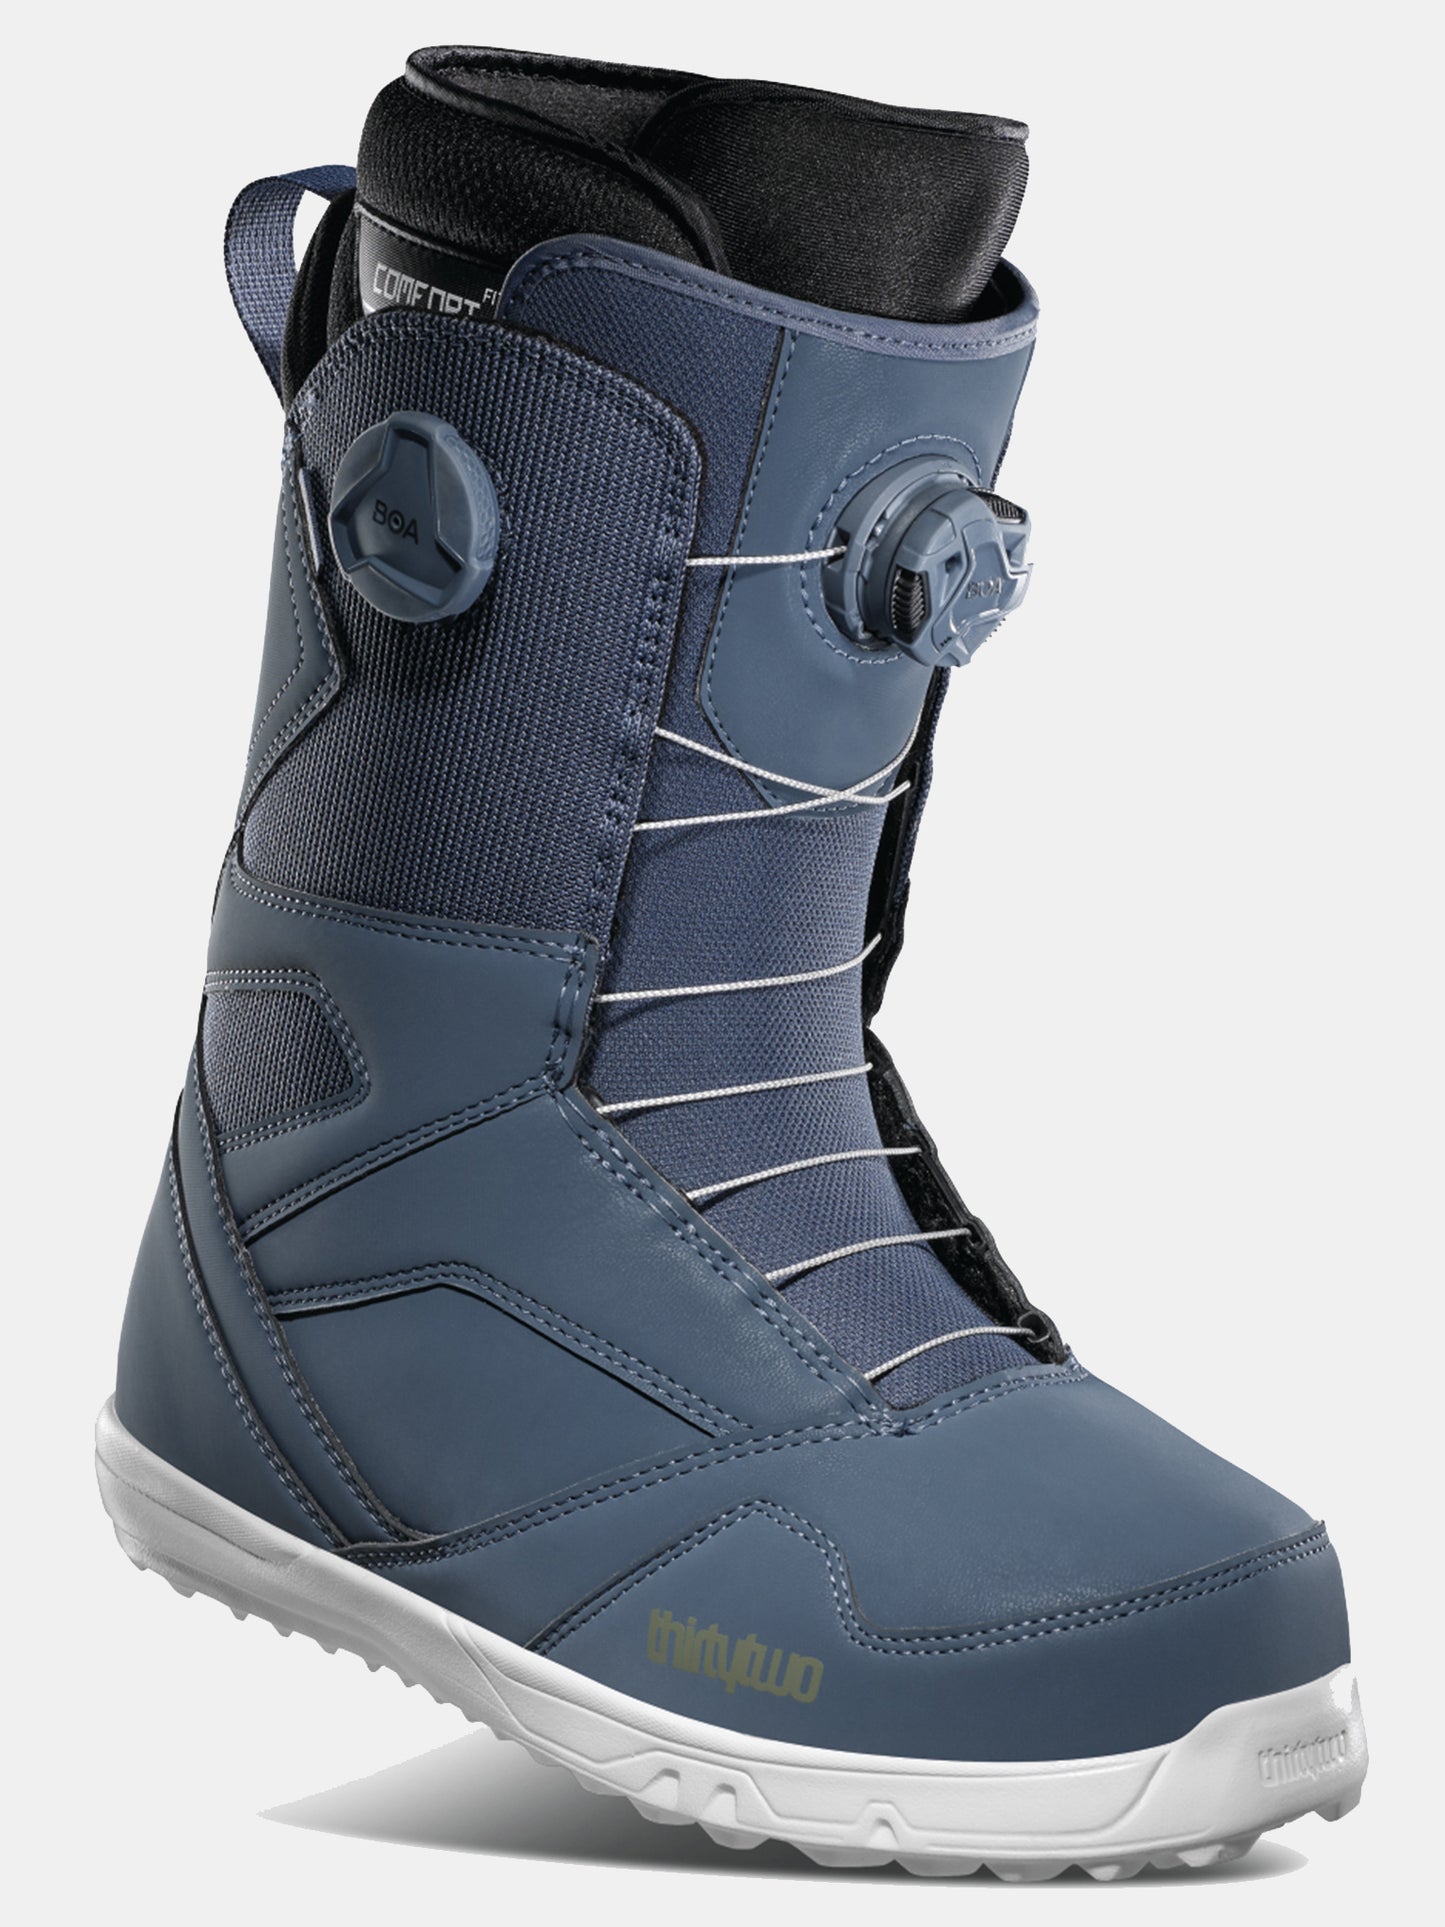 Thirtytwo STW Double Boa Snowboard Boots 2021